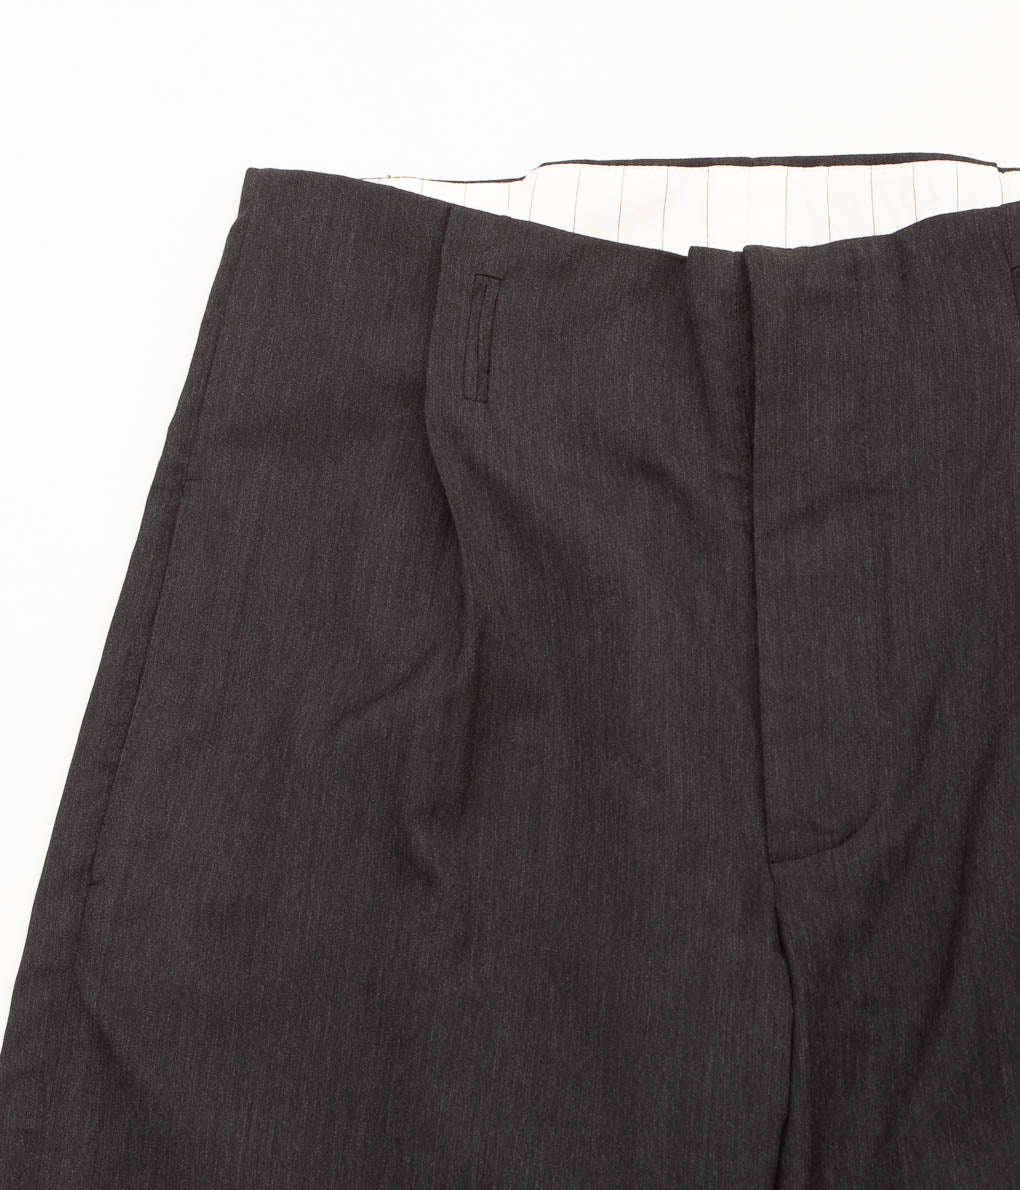 K`ANG "UNISEX PLEATED-WAIST WIDE FIT TROUSERS"(DARK GRAY)